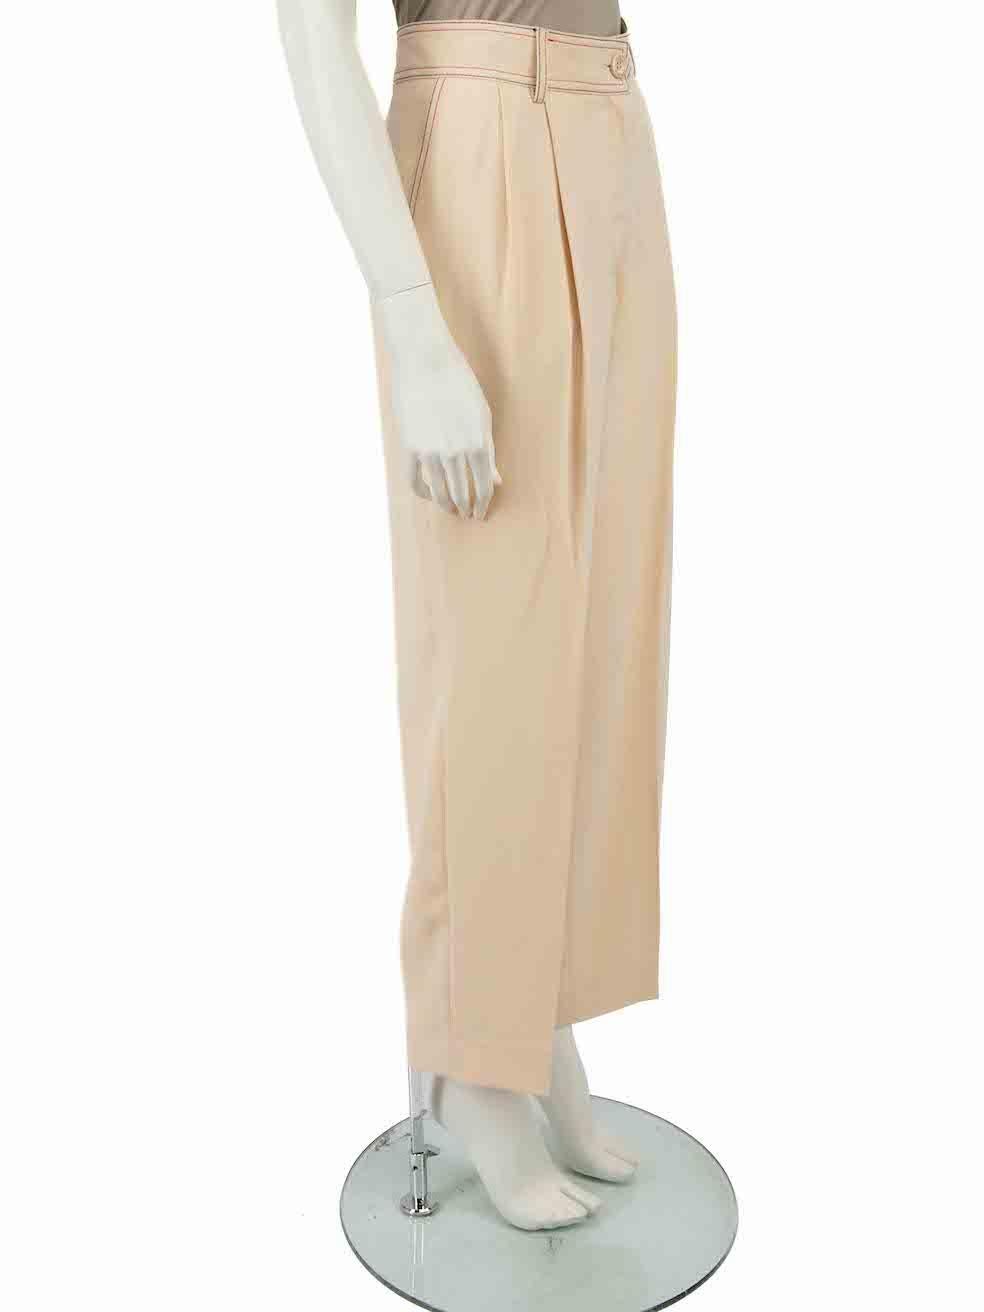 CONDITION is Never worn. No visible wear to trousers is evident on this new See By Chloé designer resale item.
 
 Details
 Peach
 Polyester
 Trousers
 Straight leg
 High rise
 Contrast stitch
 2x Side pockets
 Fly zip and button fastening
 
 
 Made